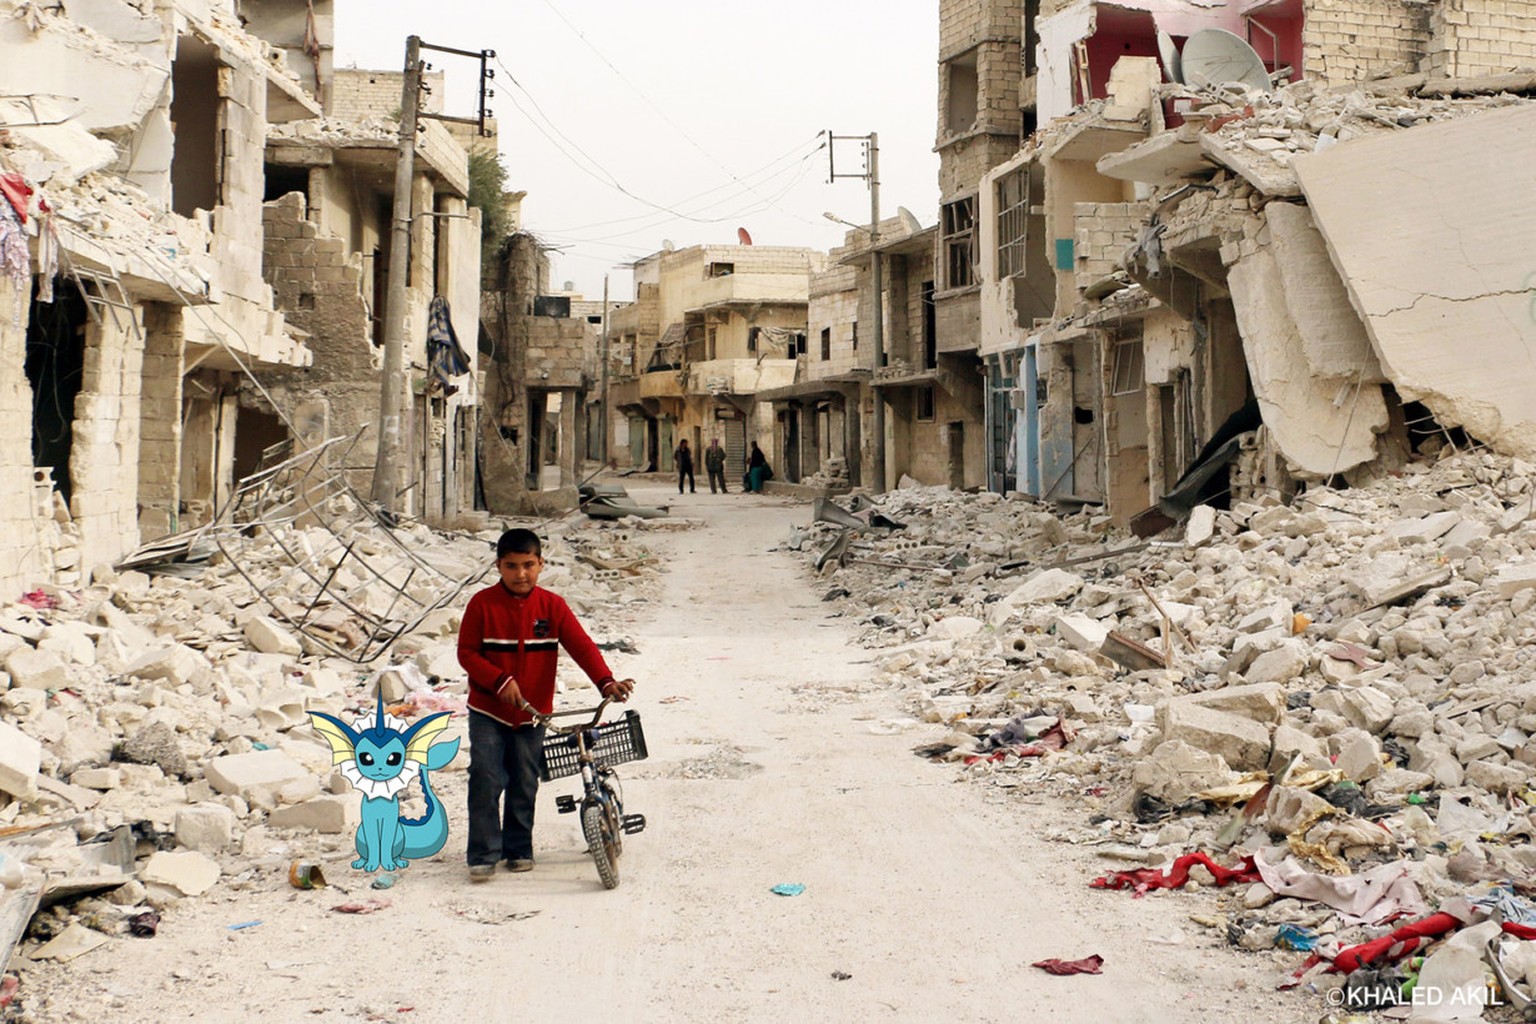 A Syrian boy walks with his bicycle in the devastated Sukari district in the northern city of Aleppo on November 13, 2014, after more than three years of fighting and shelling. Syrians are increasingl ...